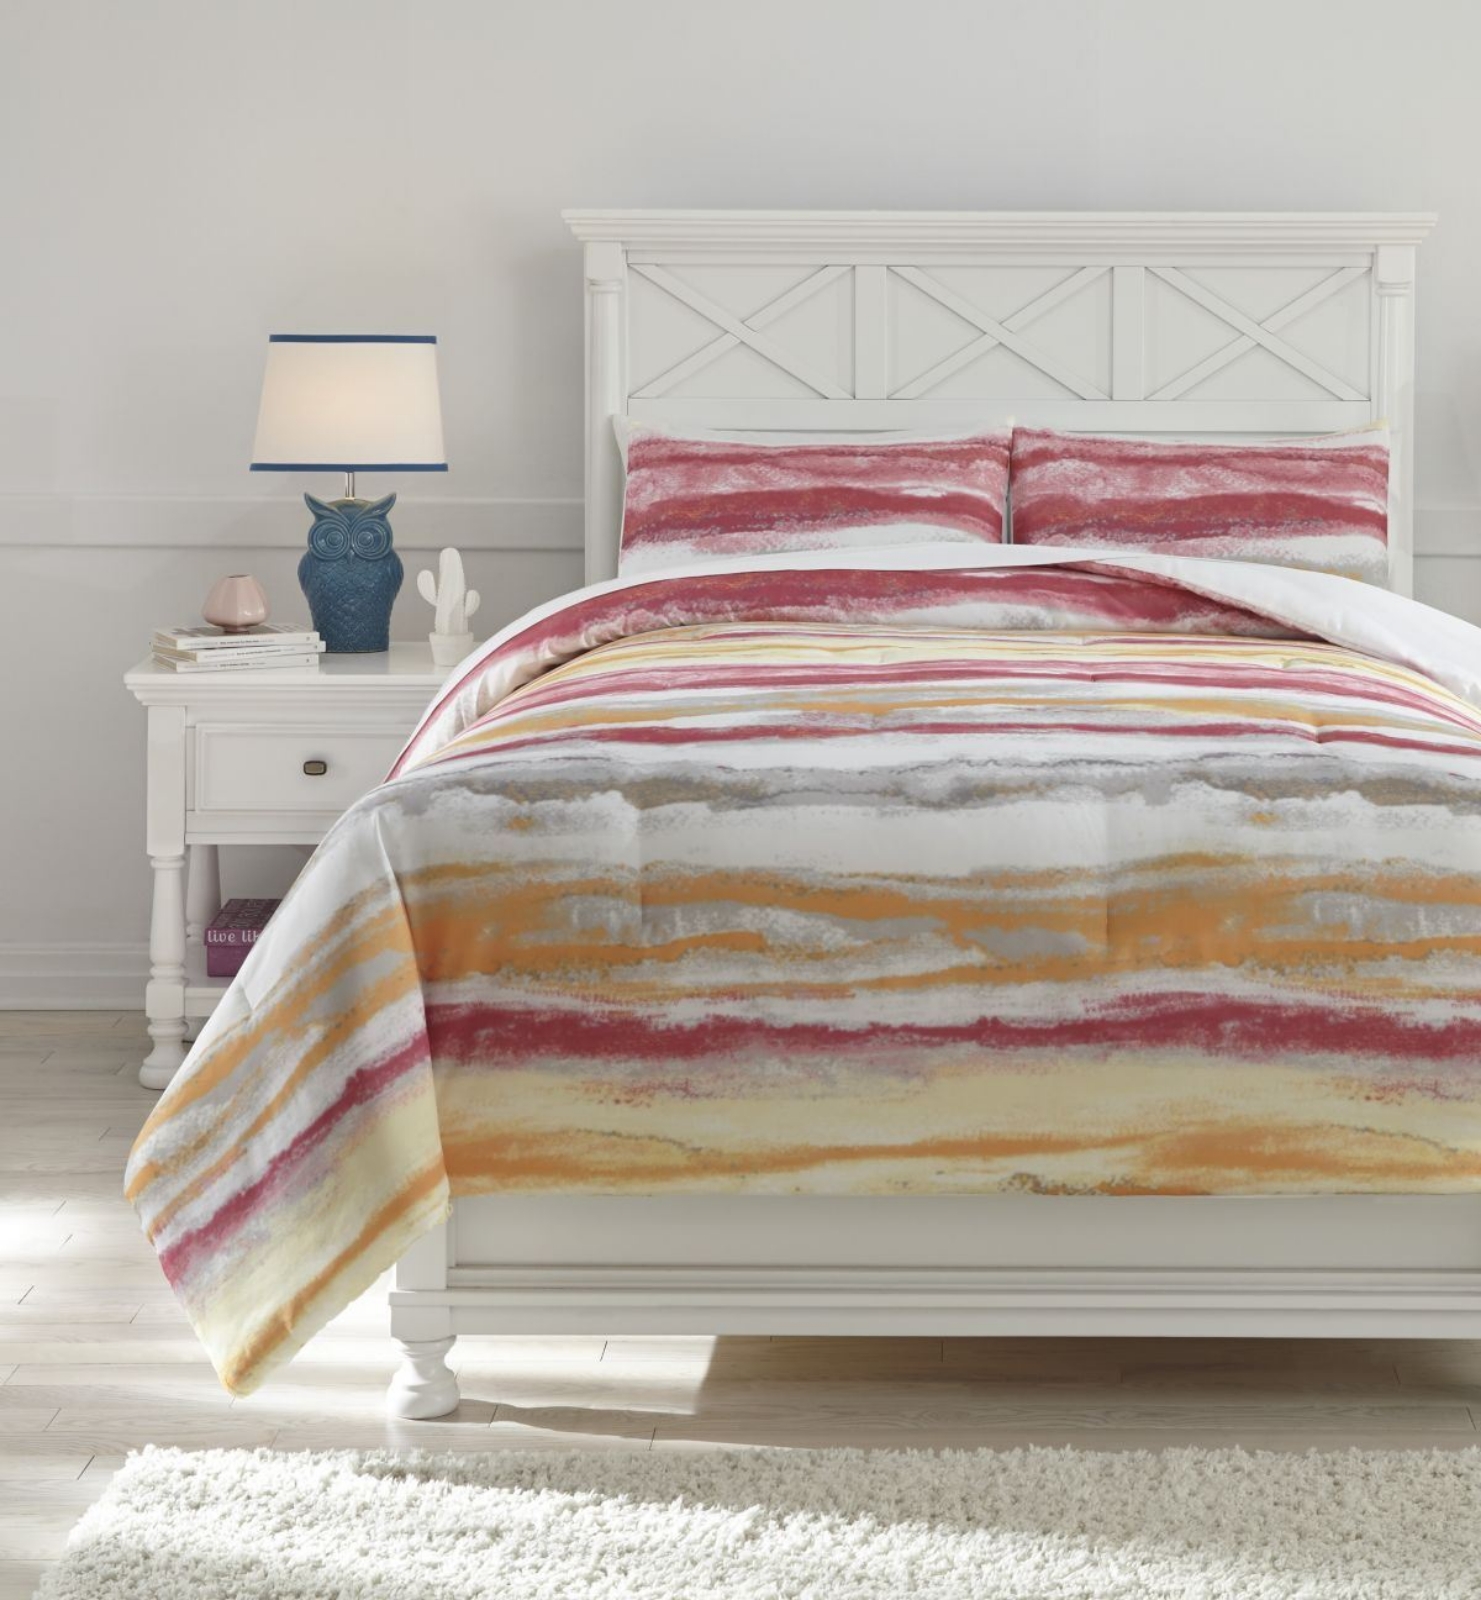 Picture of Tammy Full Comforter Set